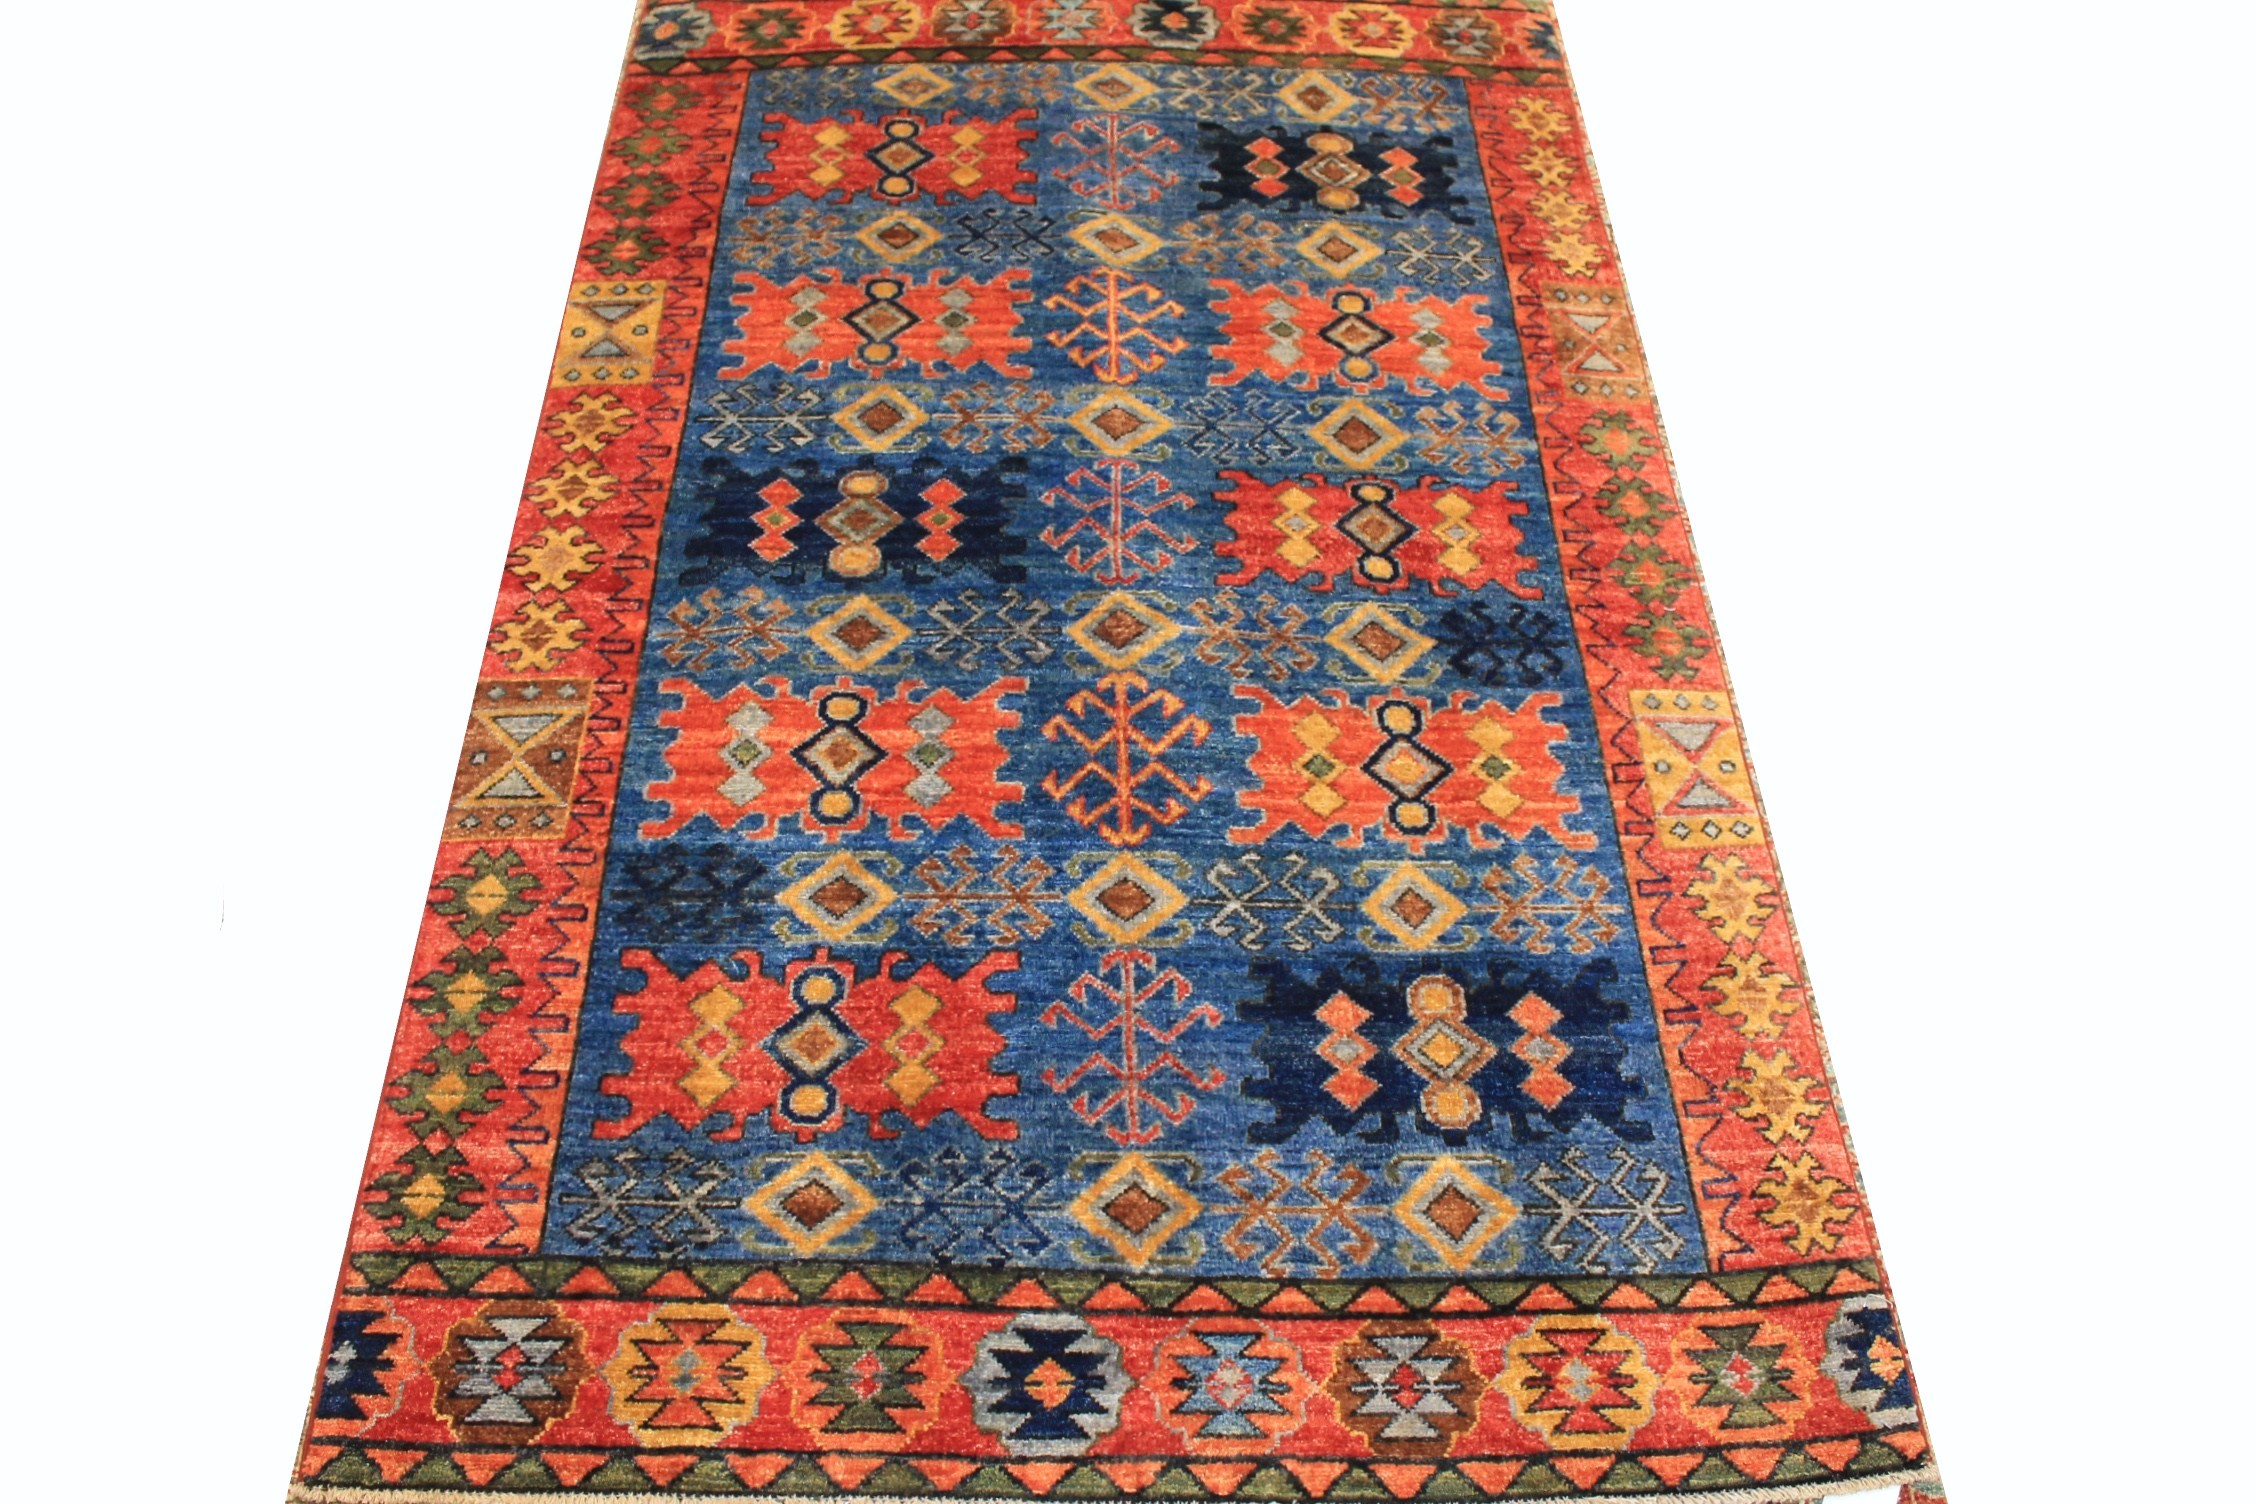 4x6 Aryana & Antique Revivals Hand Knotted  Area Rug - MR026672